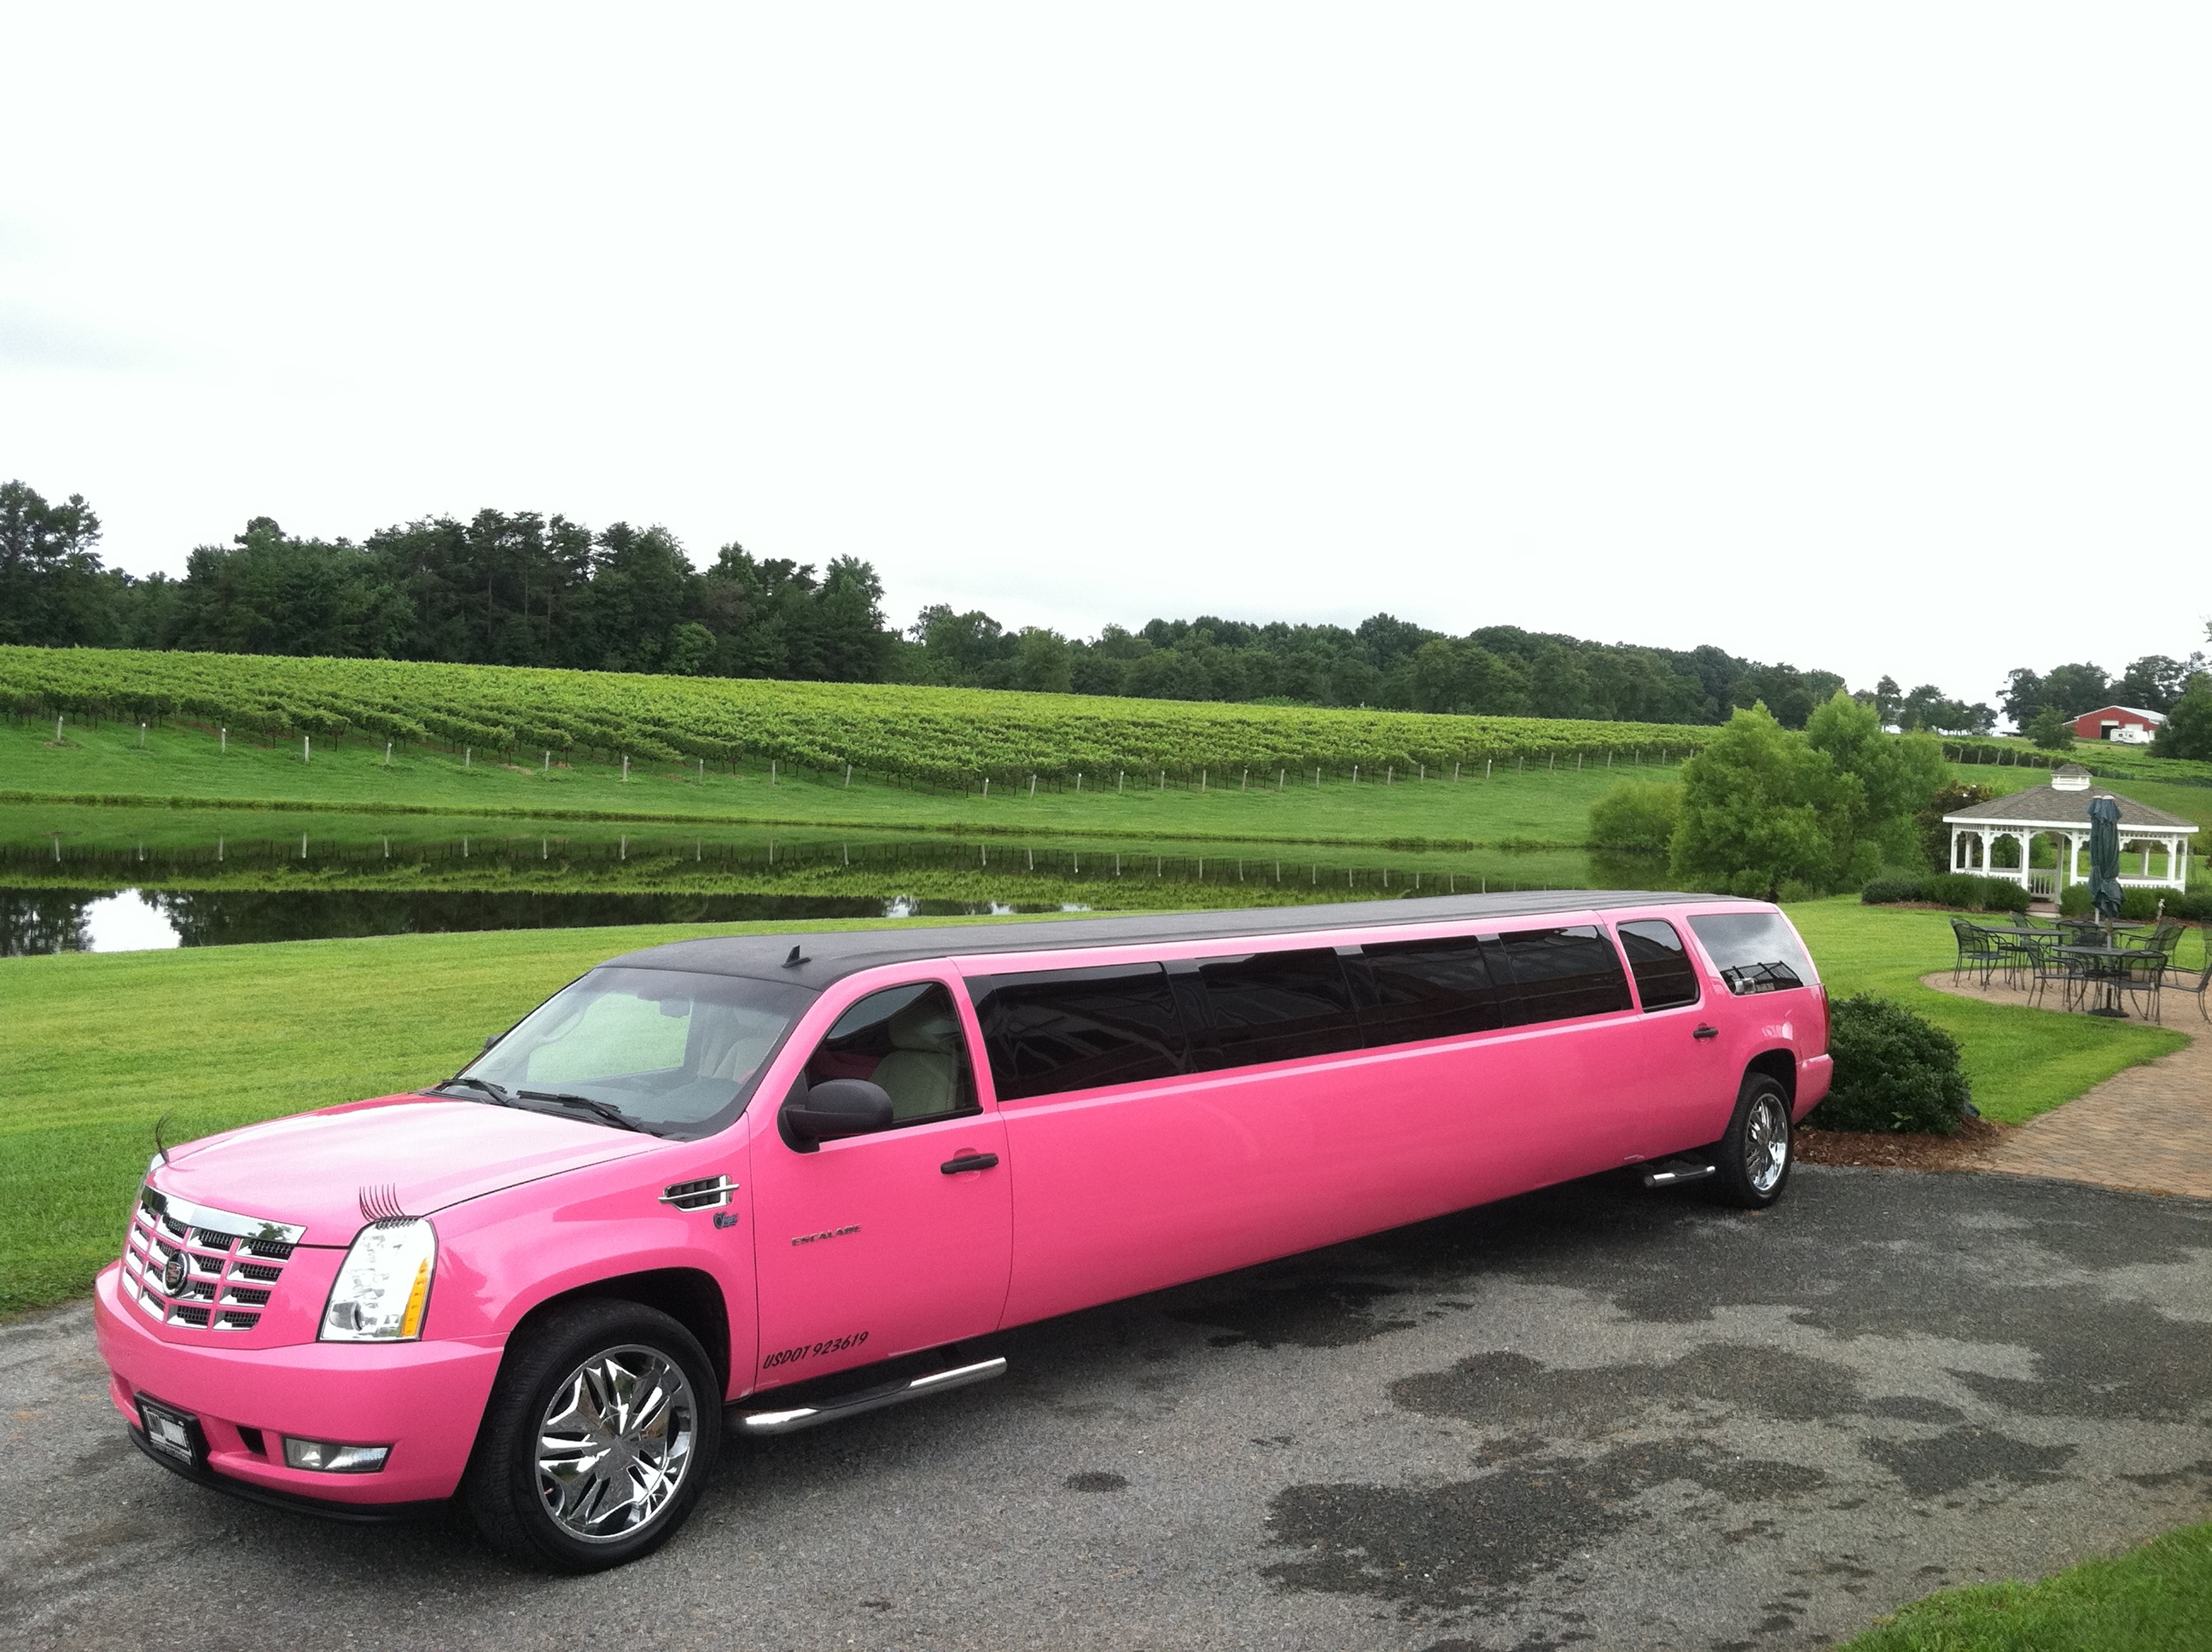 Carolina Luxury Transportation Group has the only Pink Limo in Charlotte that offers the best NC Wine Tours at Shadow Springs